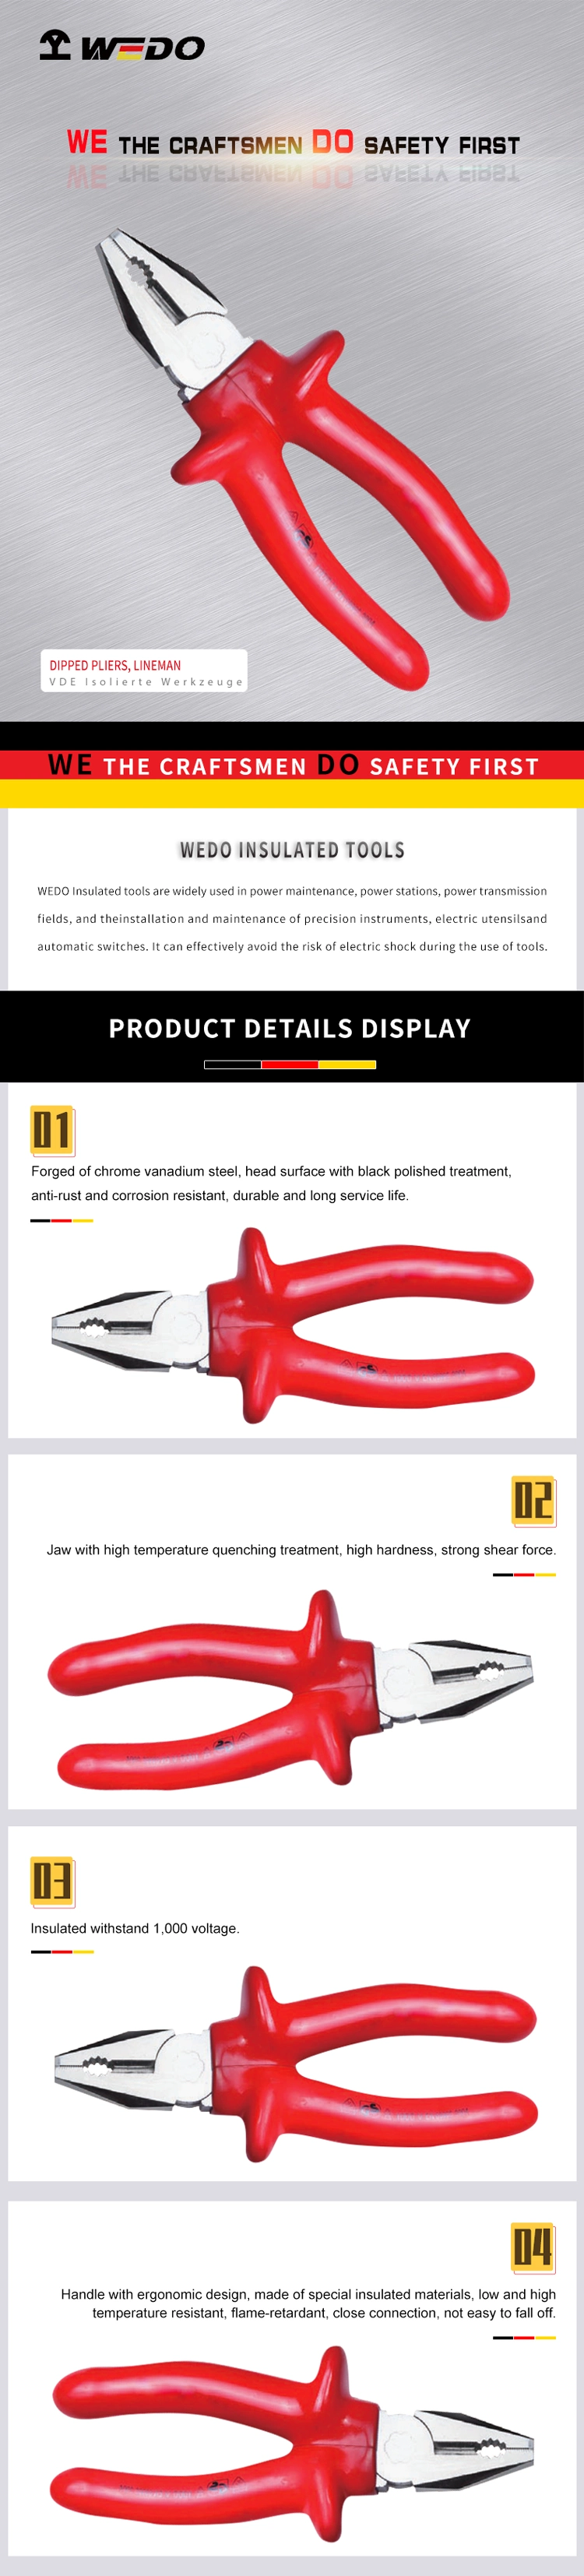 Wedo Insulation VDE Dipped Lineman Pliers for Electrician Use